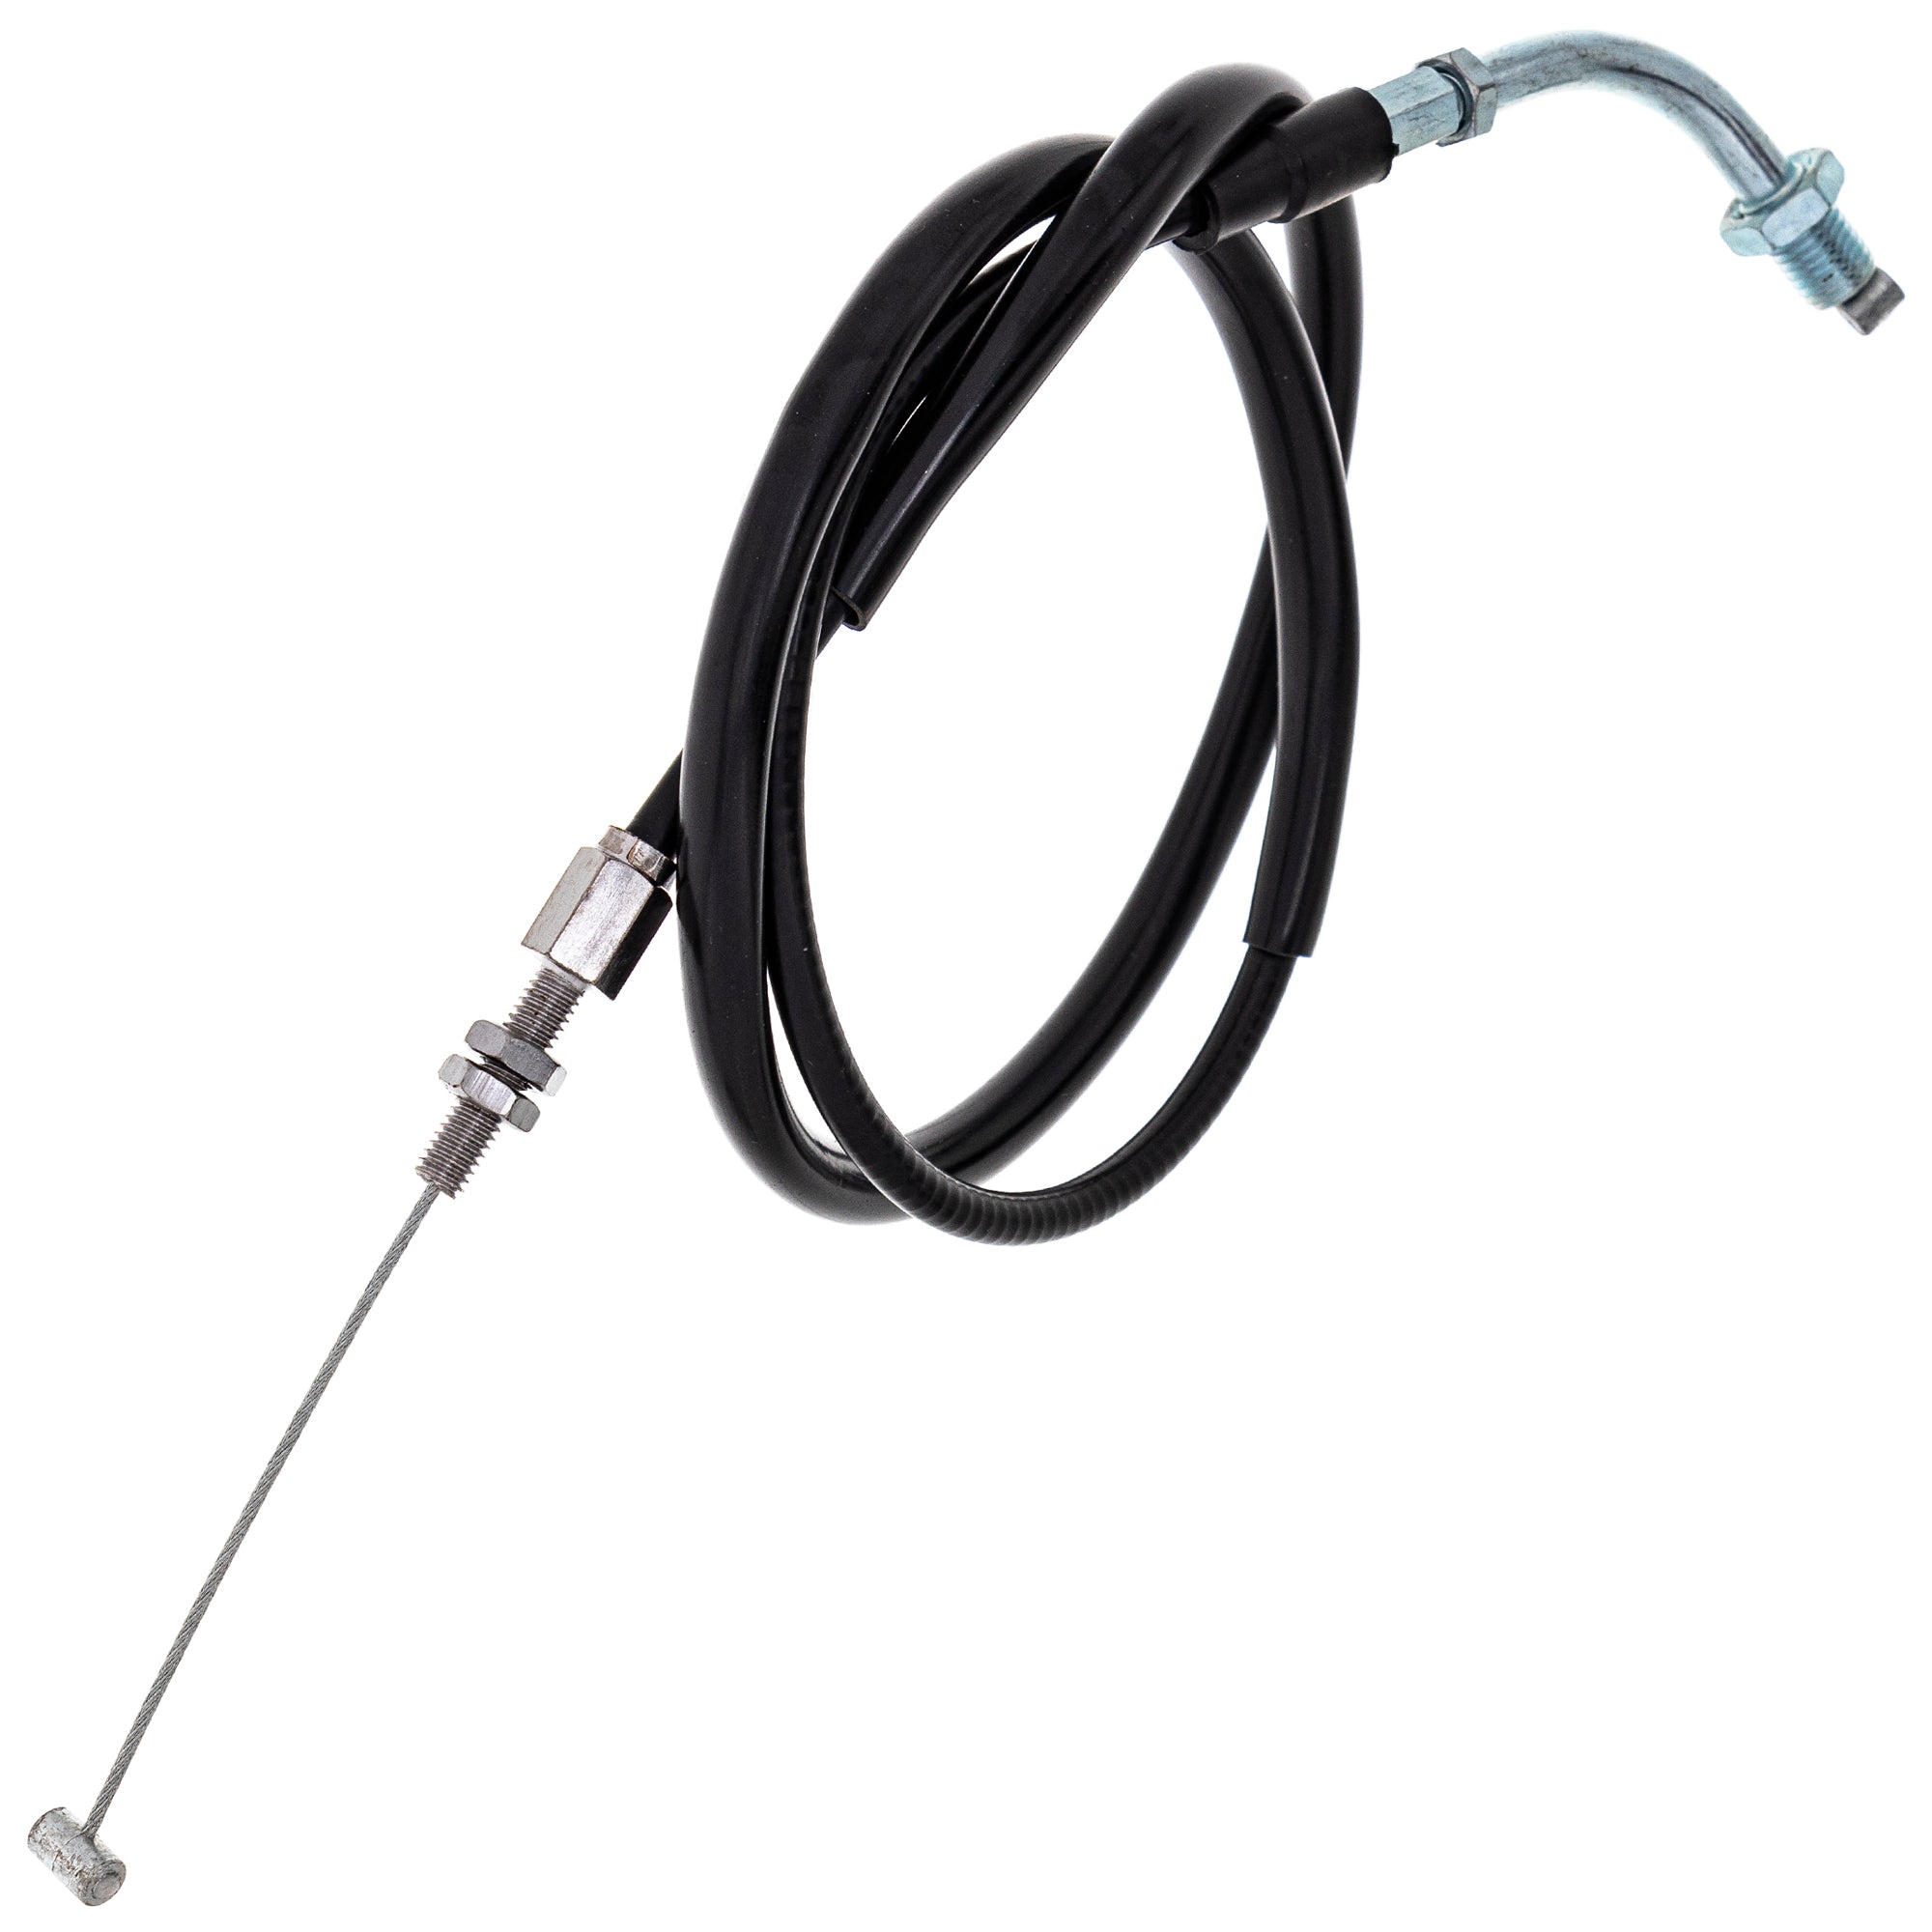 Pull Throttle Cable For Honda 17910-MZ8-G20